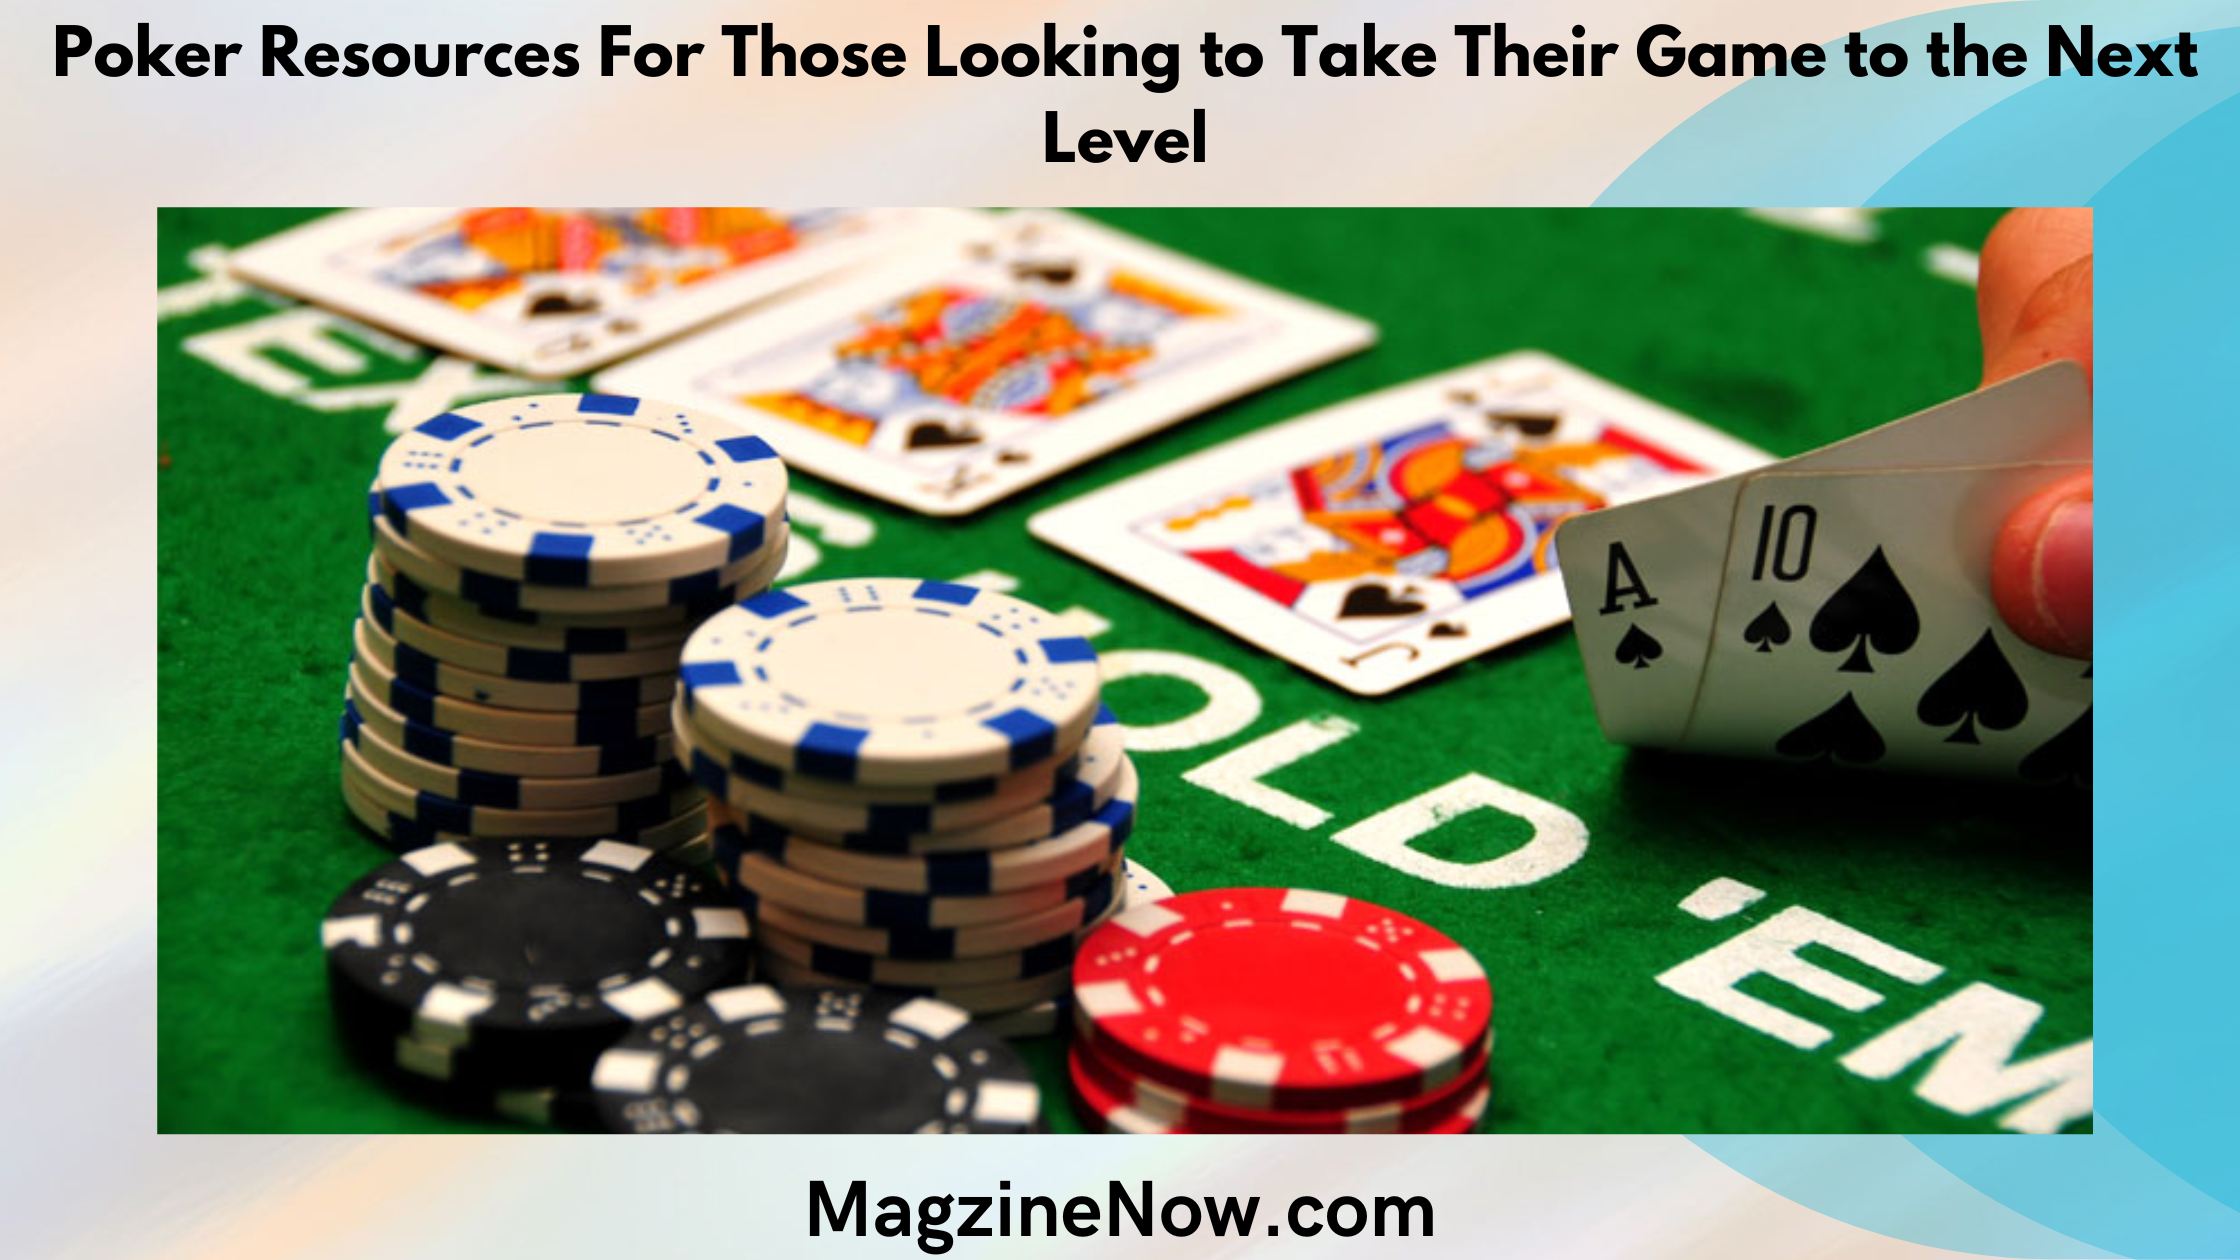 Poker Resources For Those Looking to Take Their Game to the Next Level